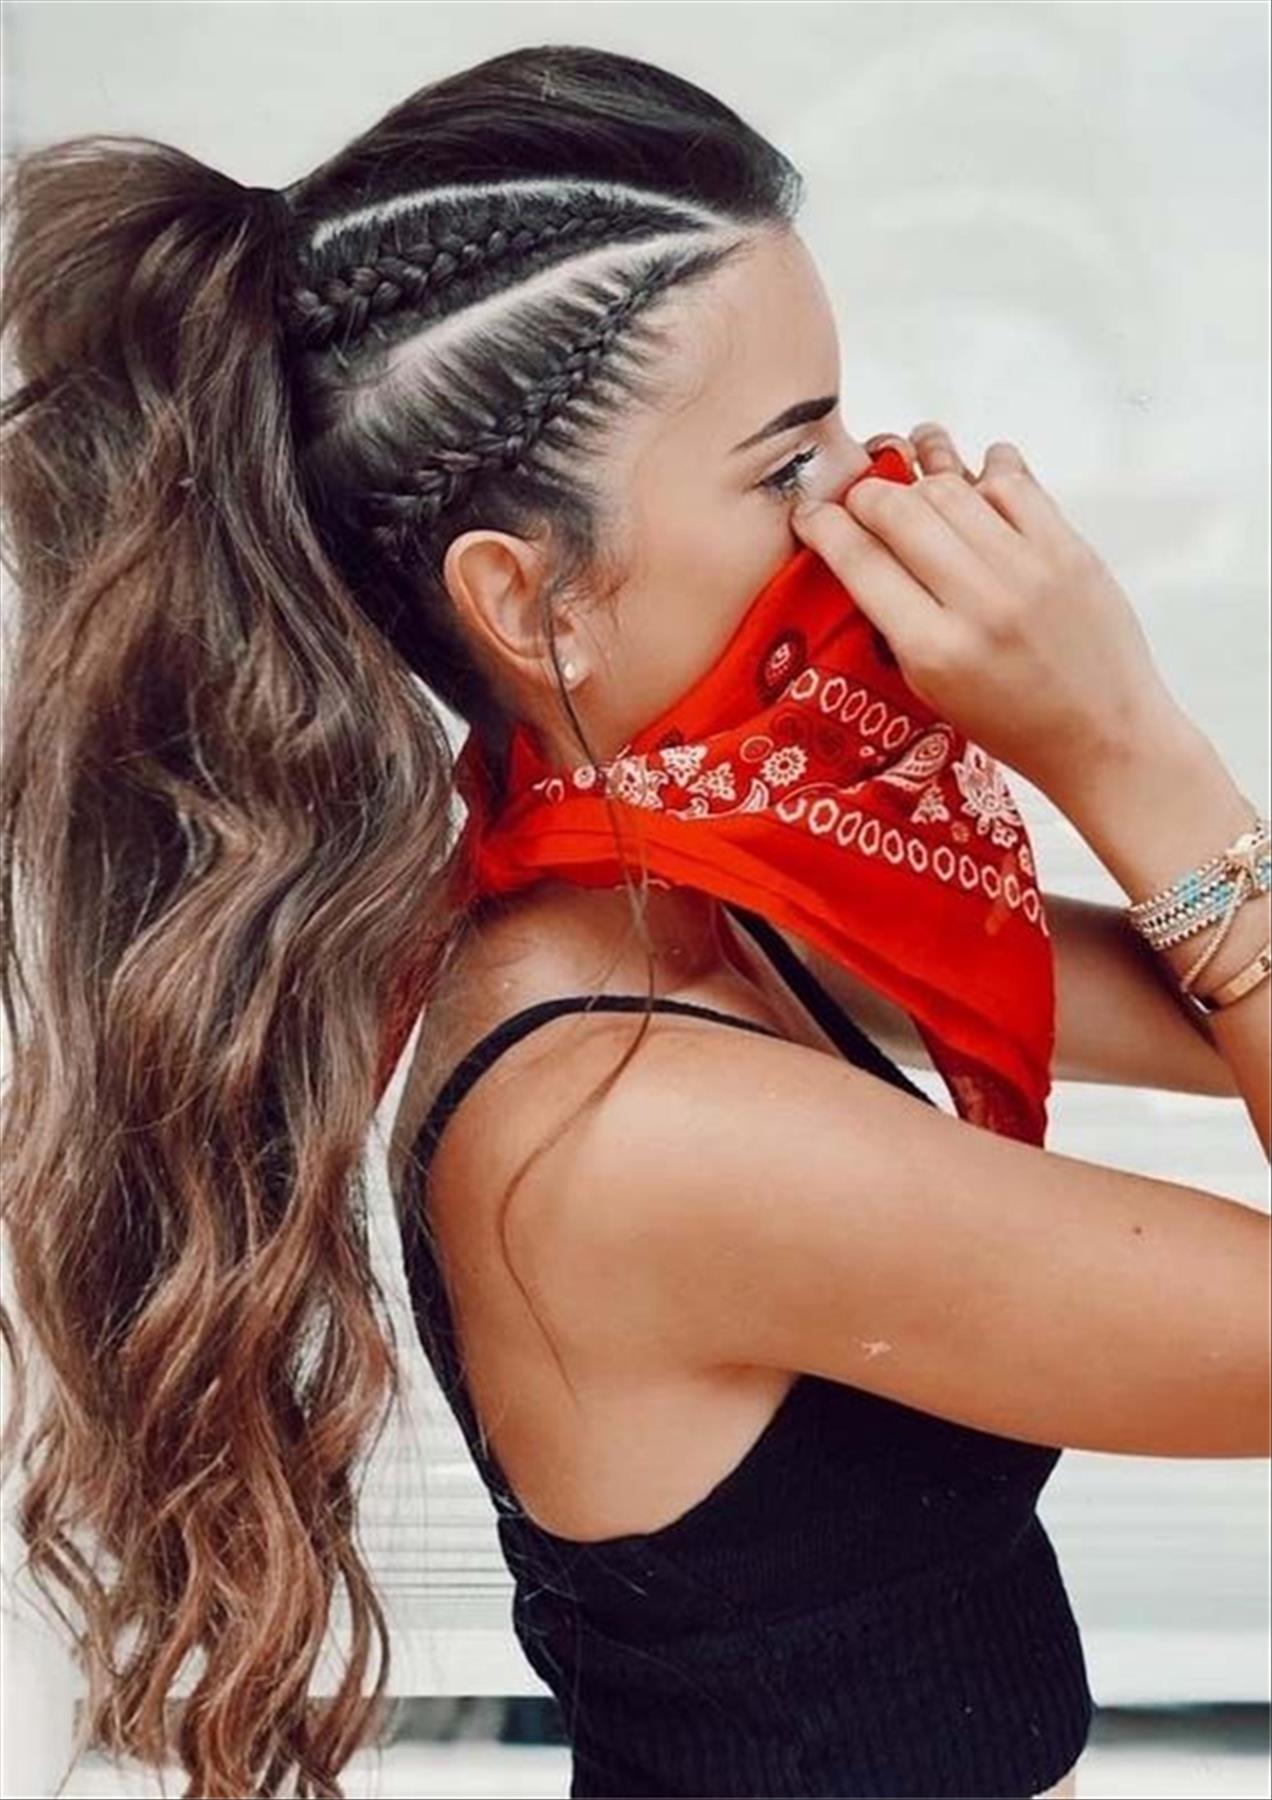 Best braided graduation hairstyles for your special day 2022